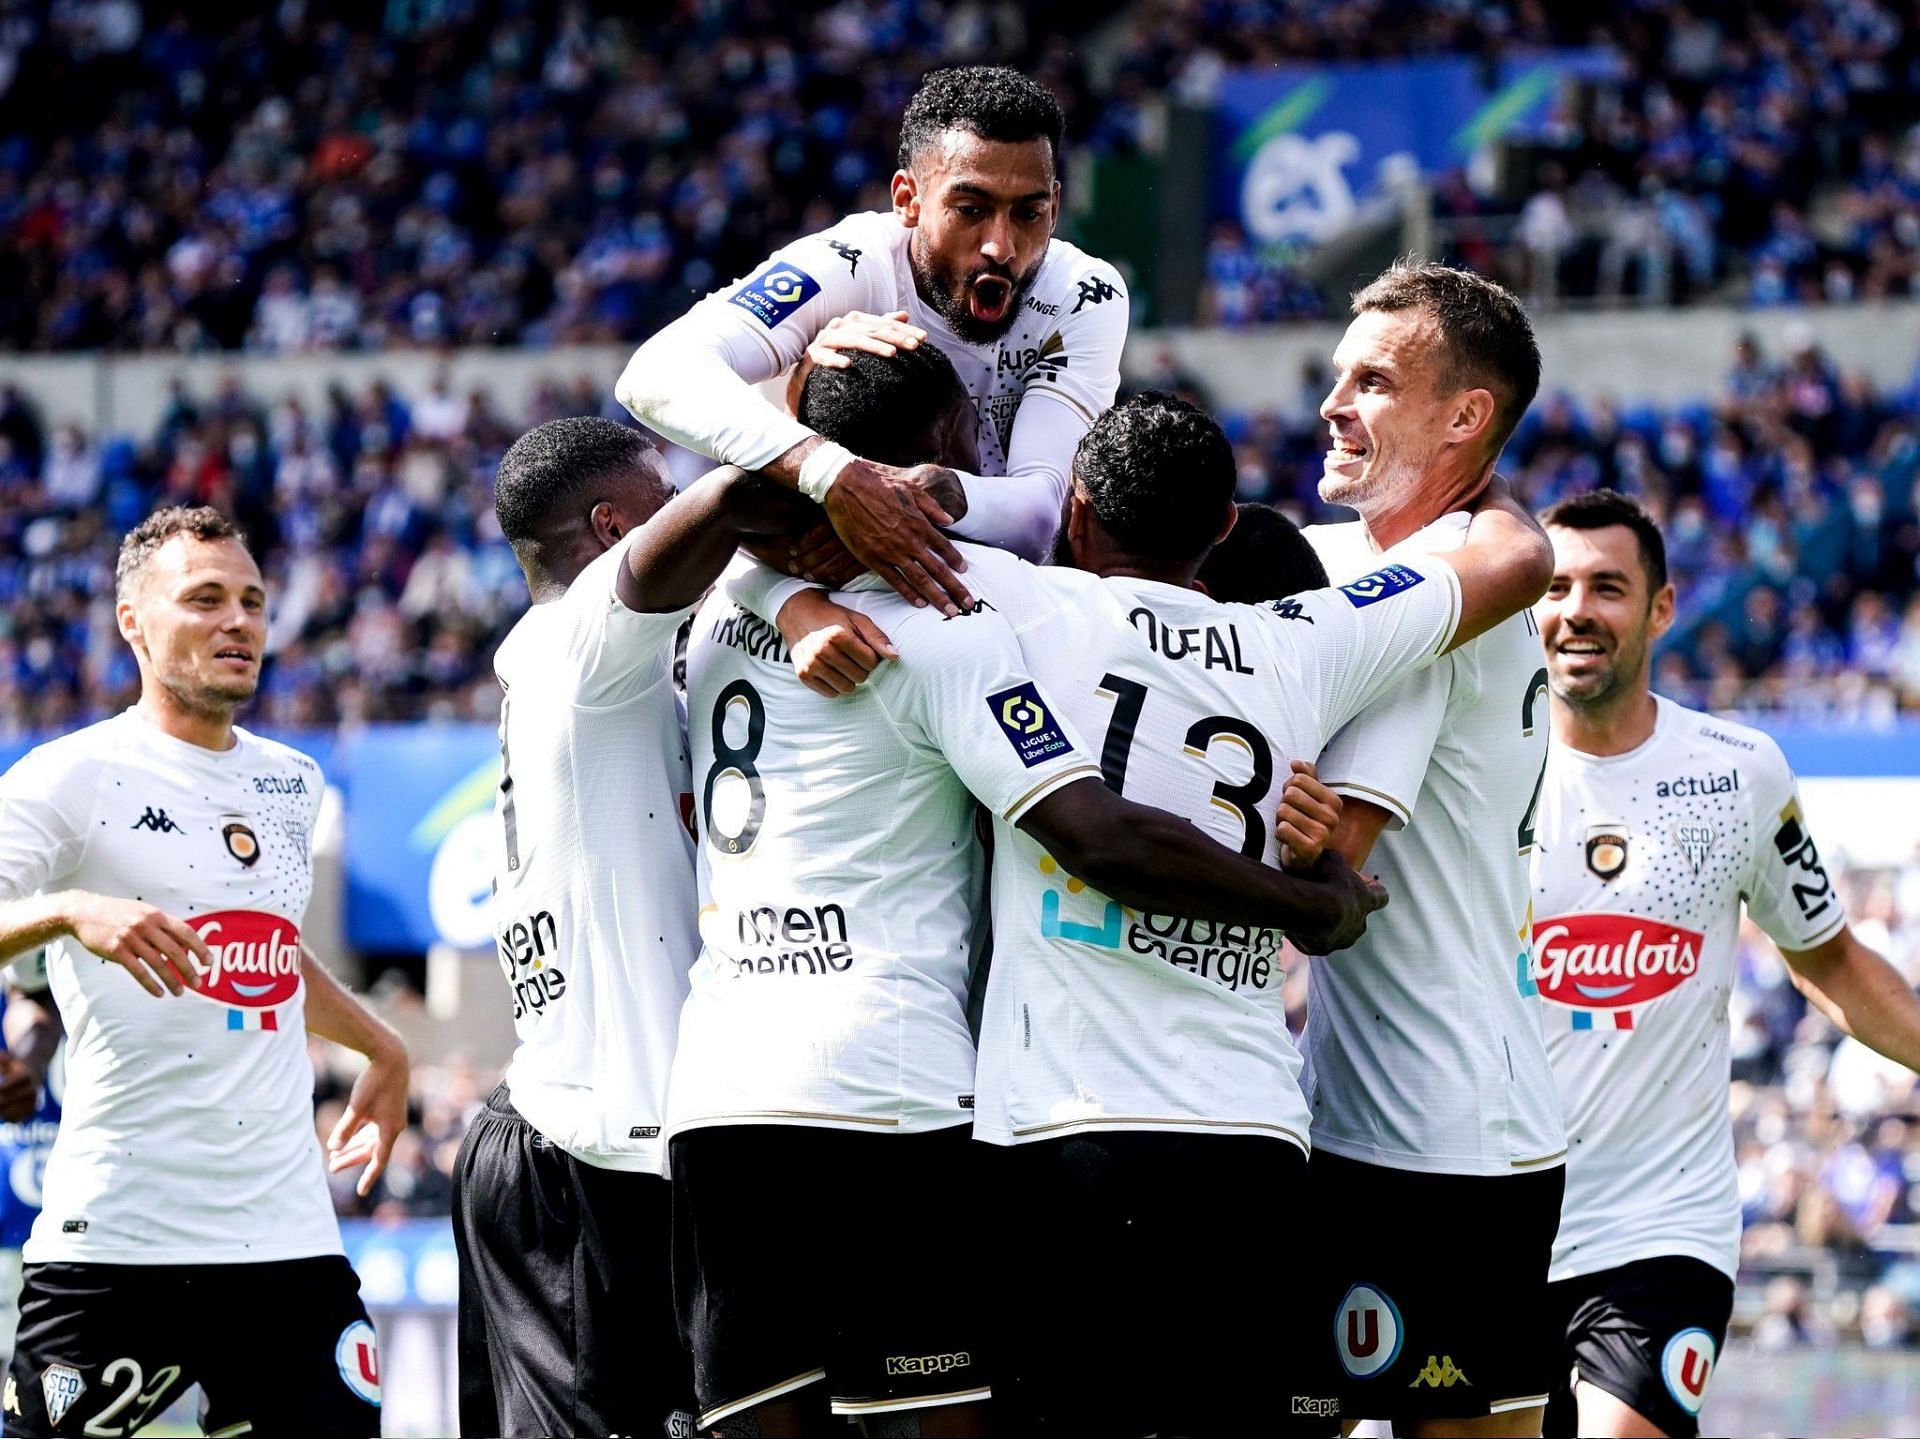 Angers host Lorient in their upcoming Ligue 1 fixture on Sunday